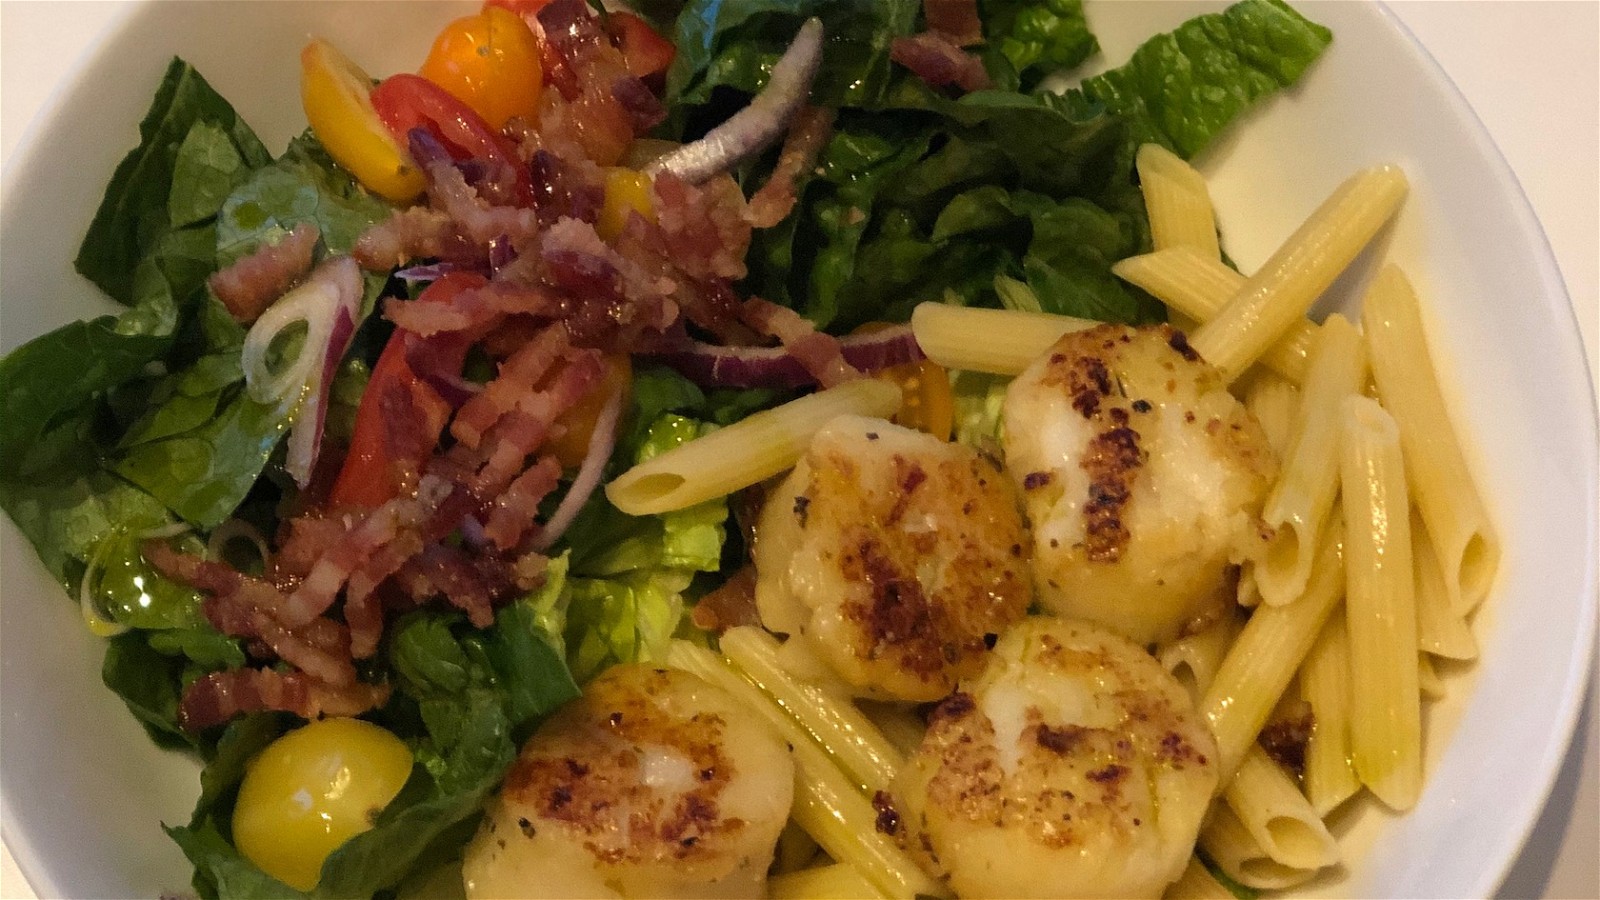 Image of Seared Scallop Salad and Pasta Bowl